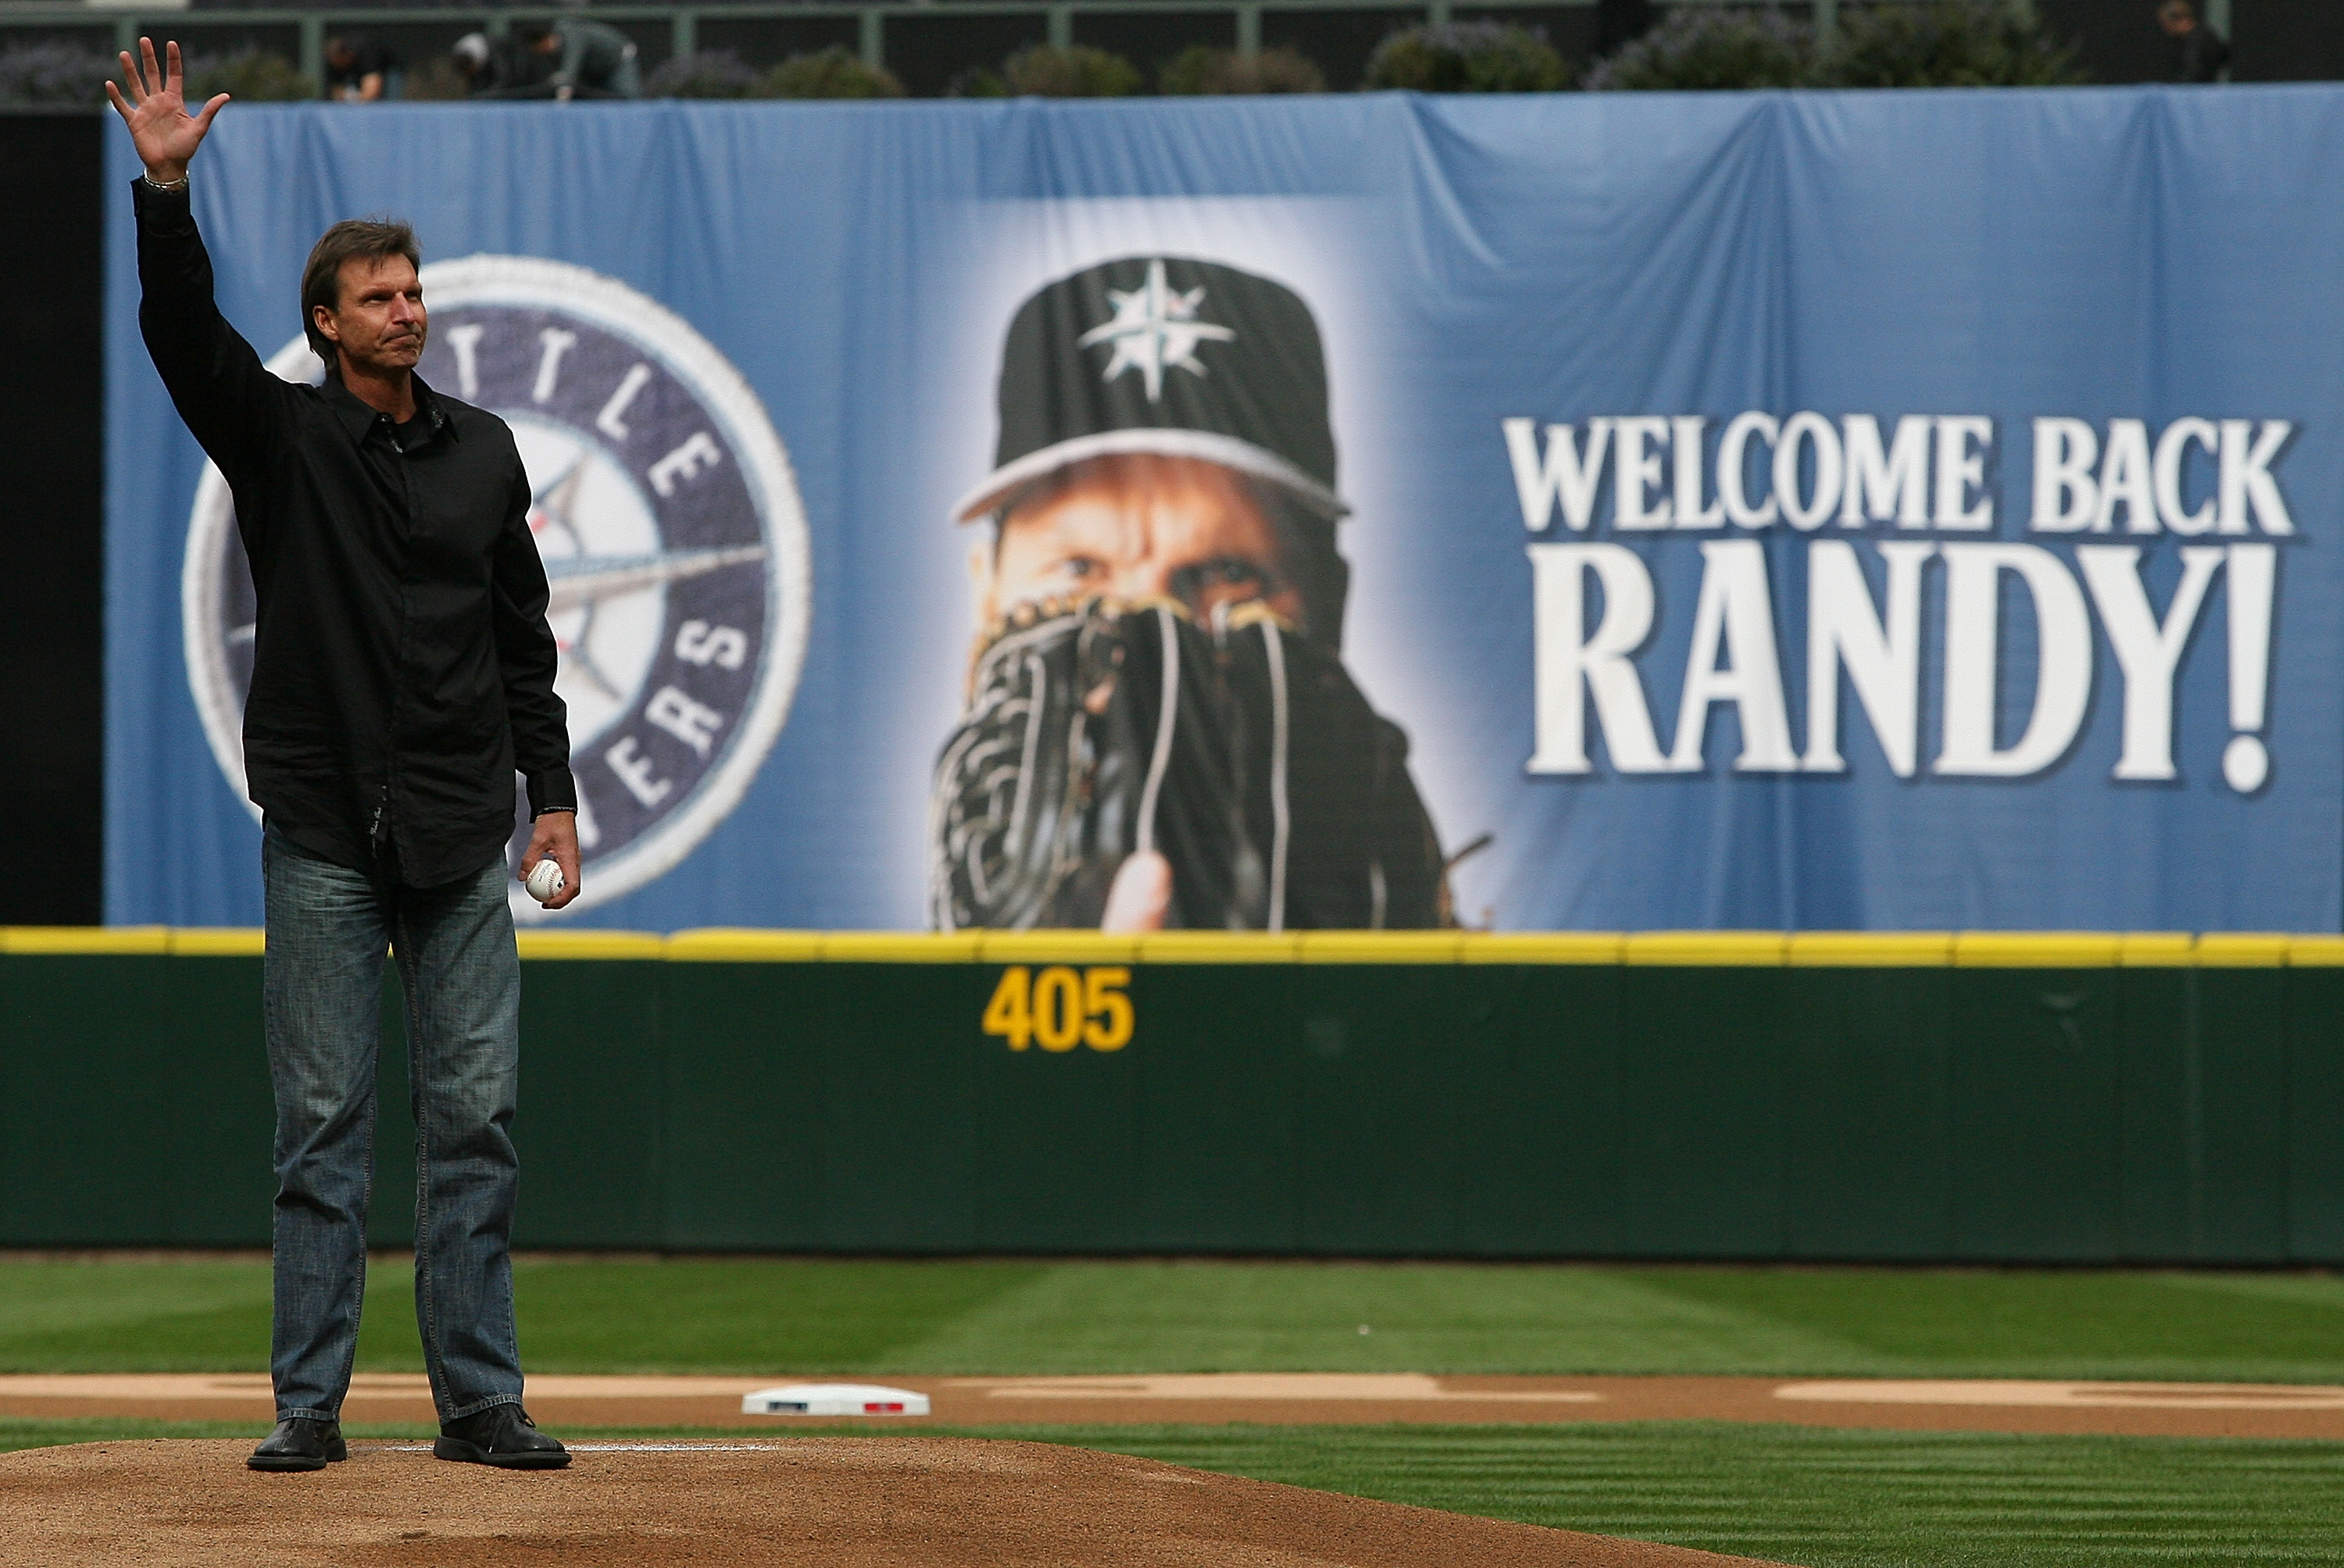 SEATTLE - APRIL 12:  Former Mariners star Randy Johnson waves to the crowd prior to throwing out the ceremonial first pitch before the Mariners' home opener against the Oakland Athletics at Safeco Field on April 12, 2010 in Seattle, Washington. (Photo by